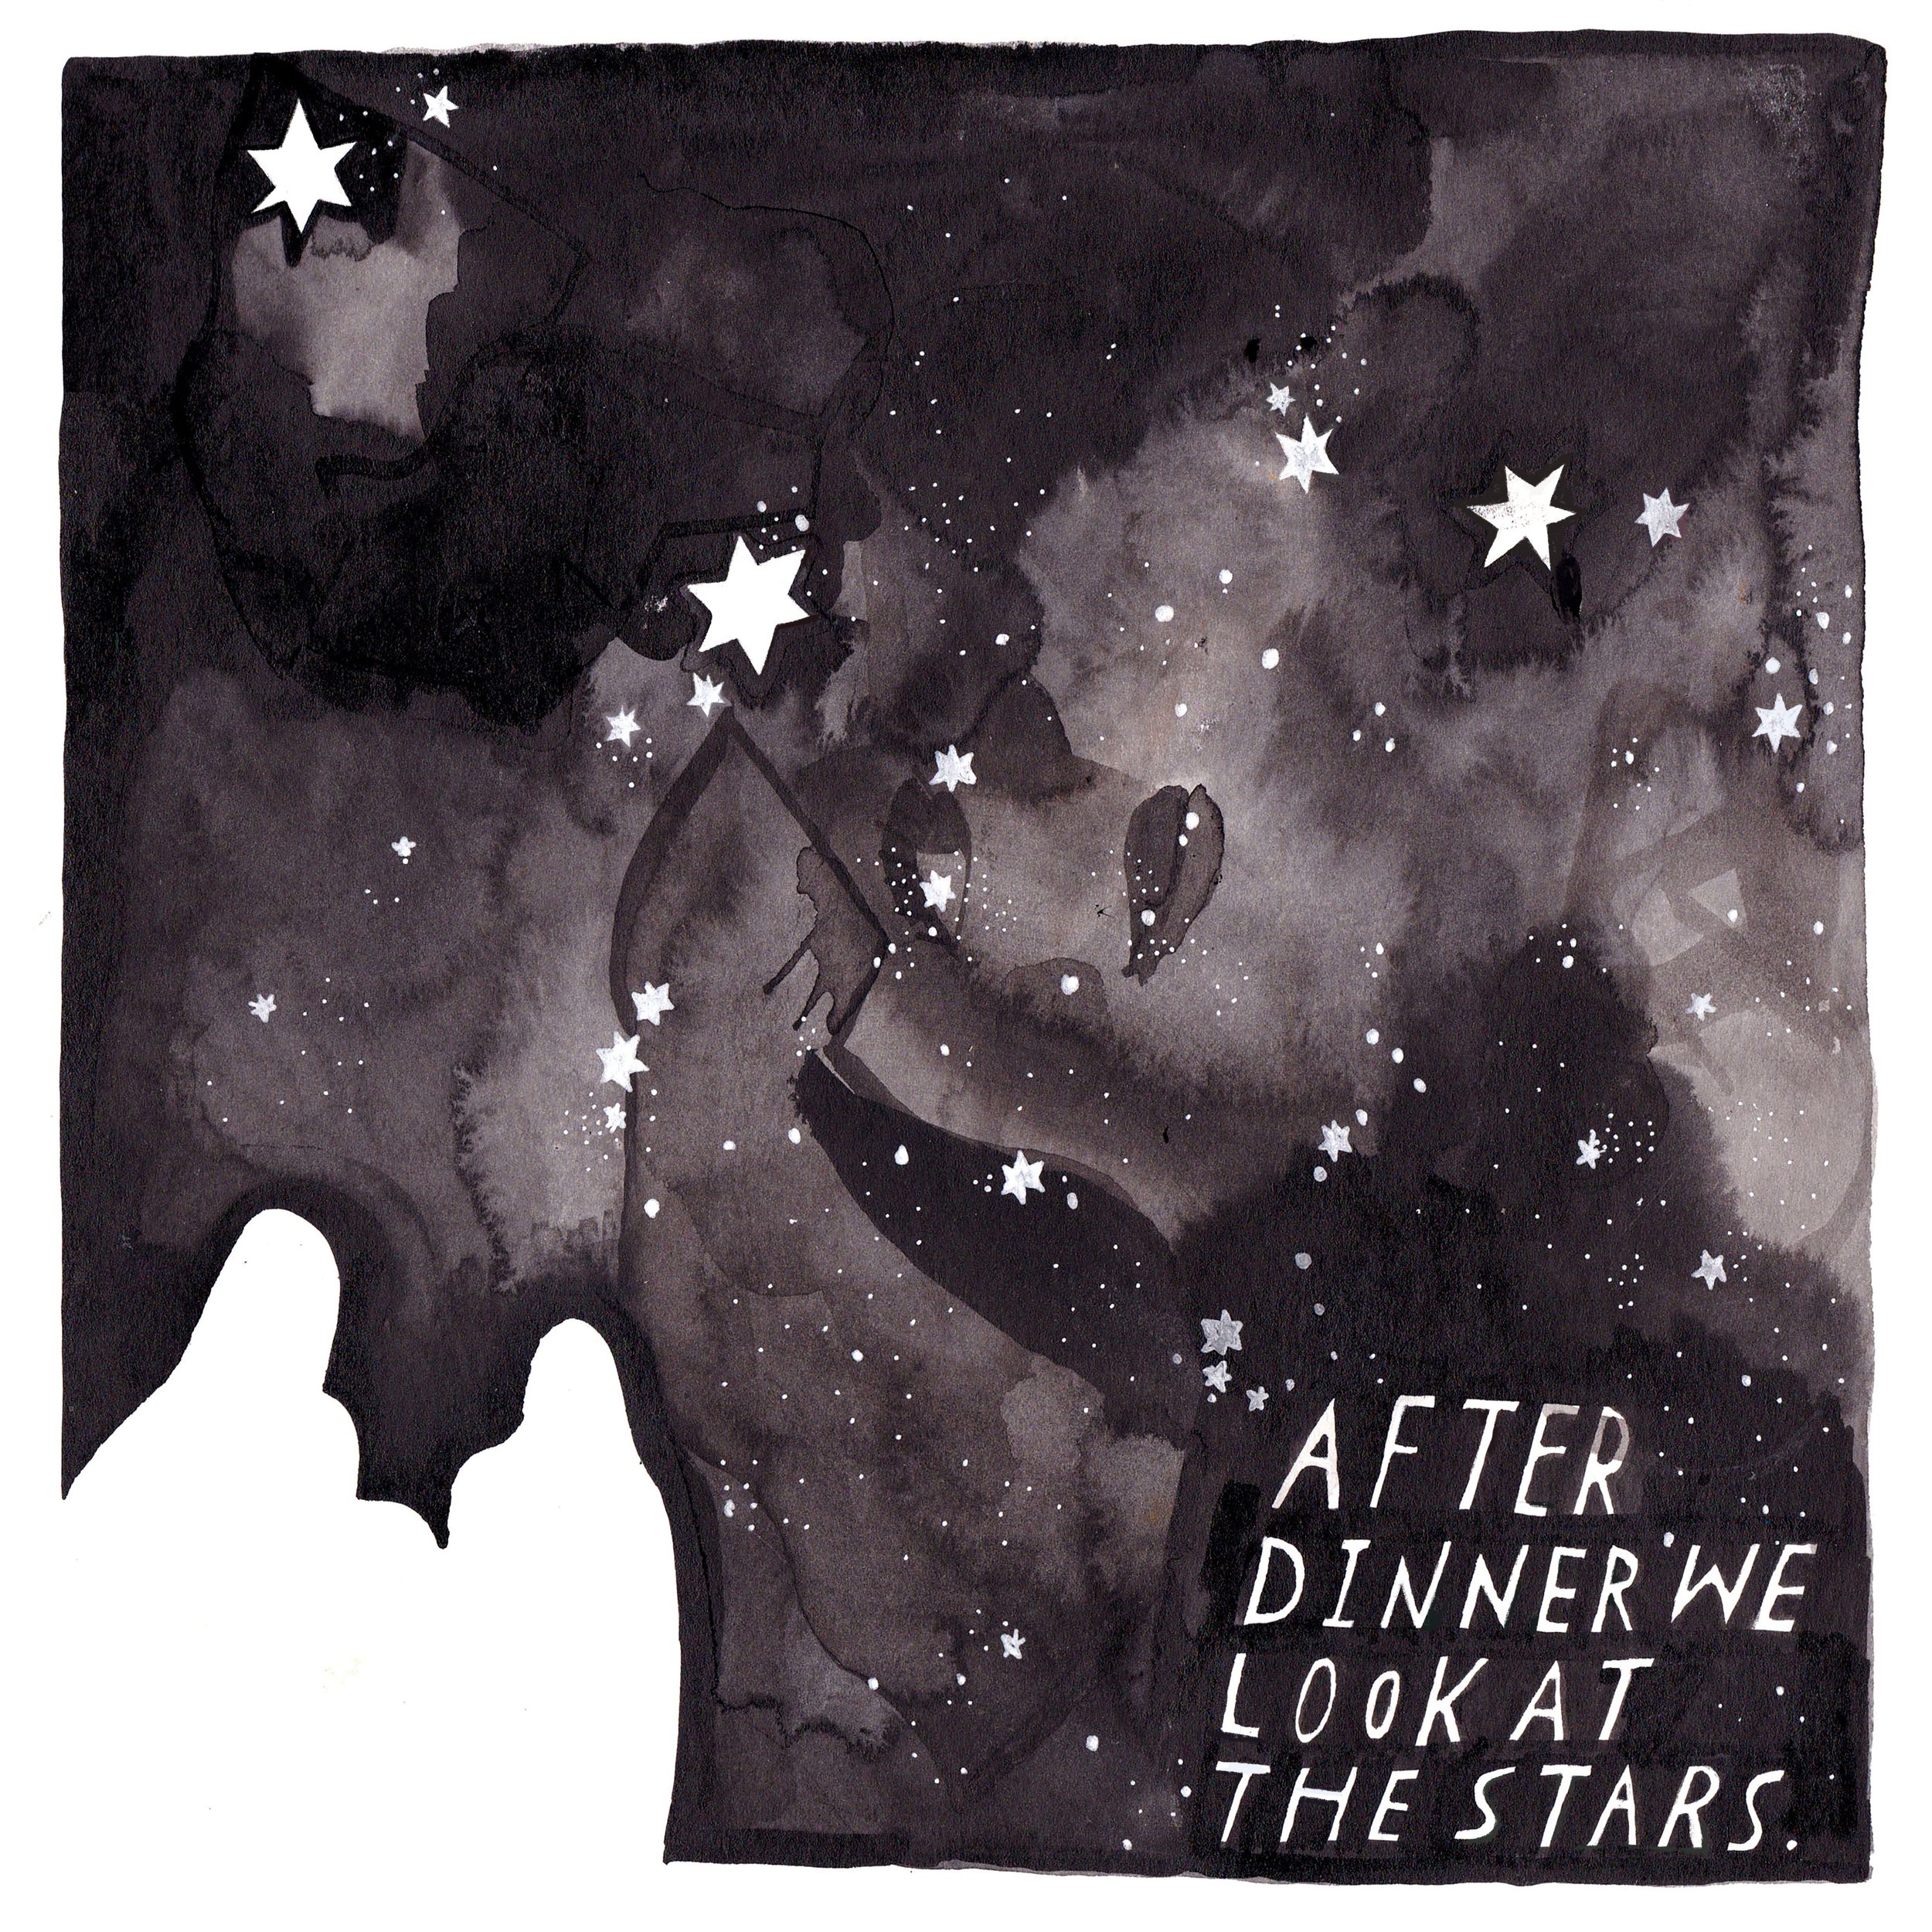 7._after_dinner_we_look_at_the_stars..jpg